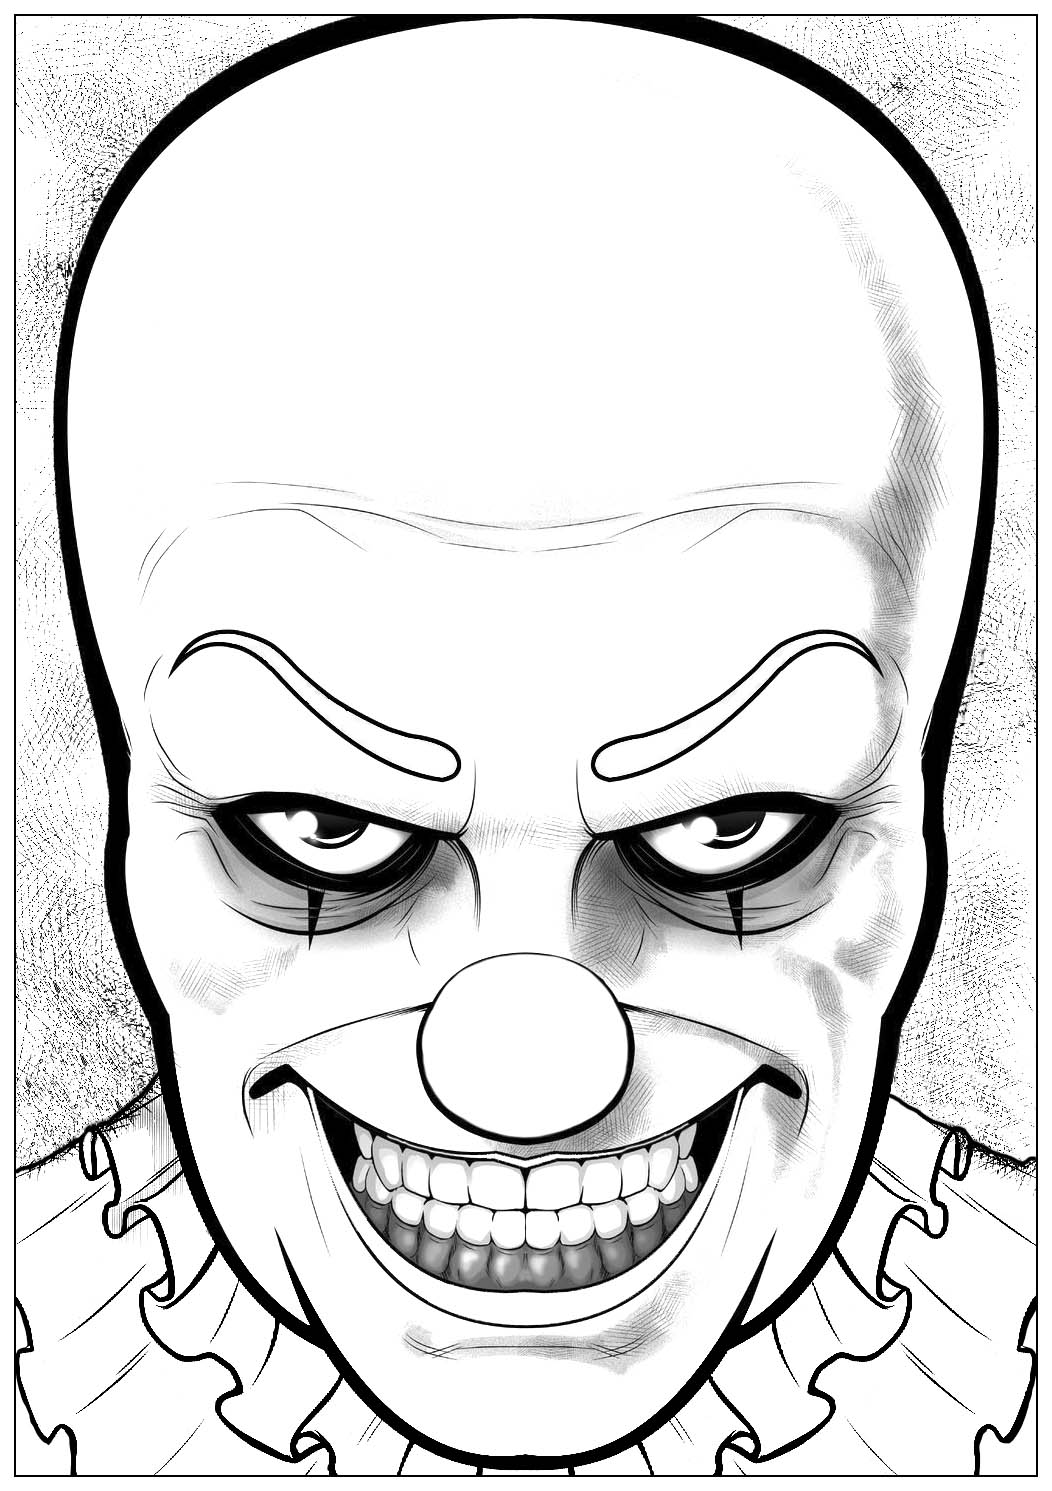 Would you dare to color this horrible Pennywise, the clown from 'It' ?